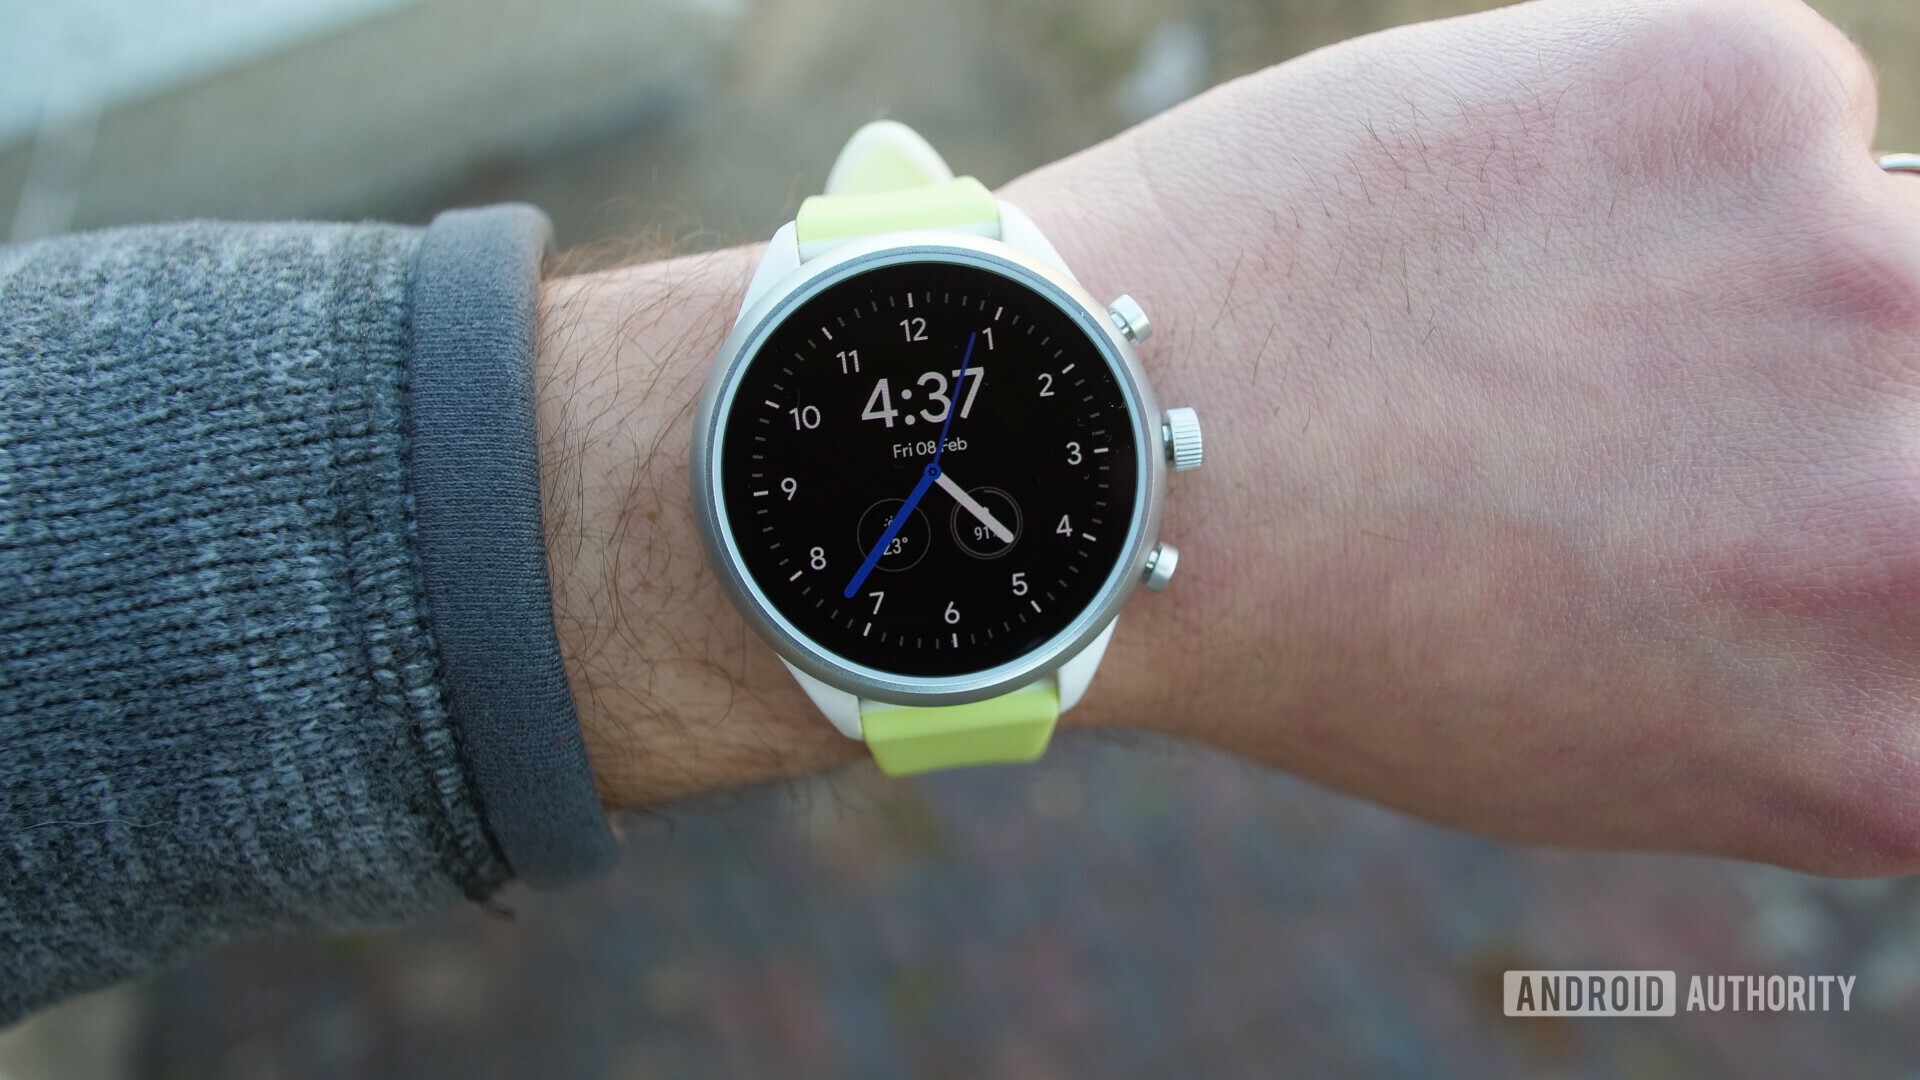 Photo of smartwatch Fossil Sport on a hand with turned on oled display watch face